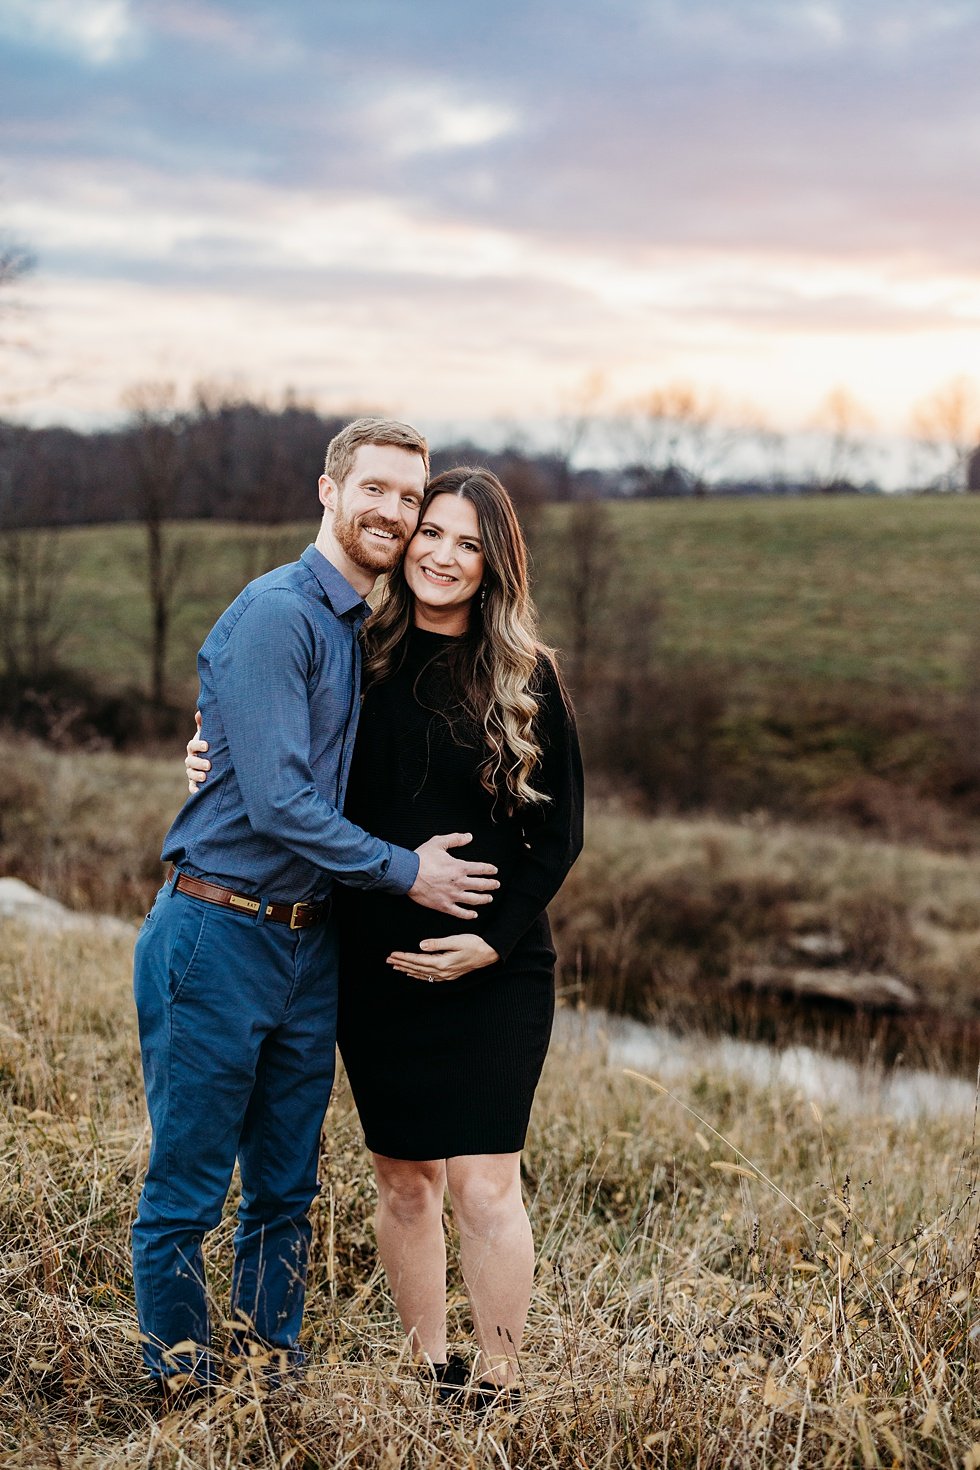  Maternity session at greenhouse and horse farm, Prospect Kentucky 